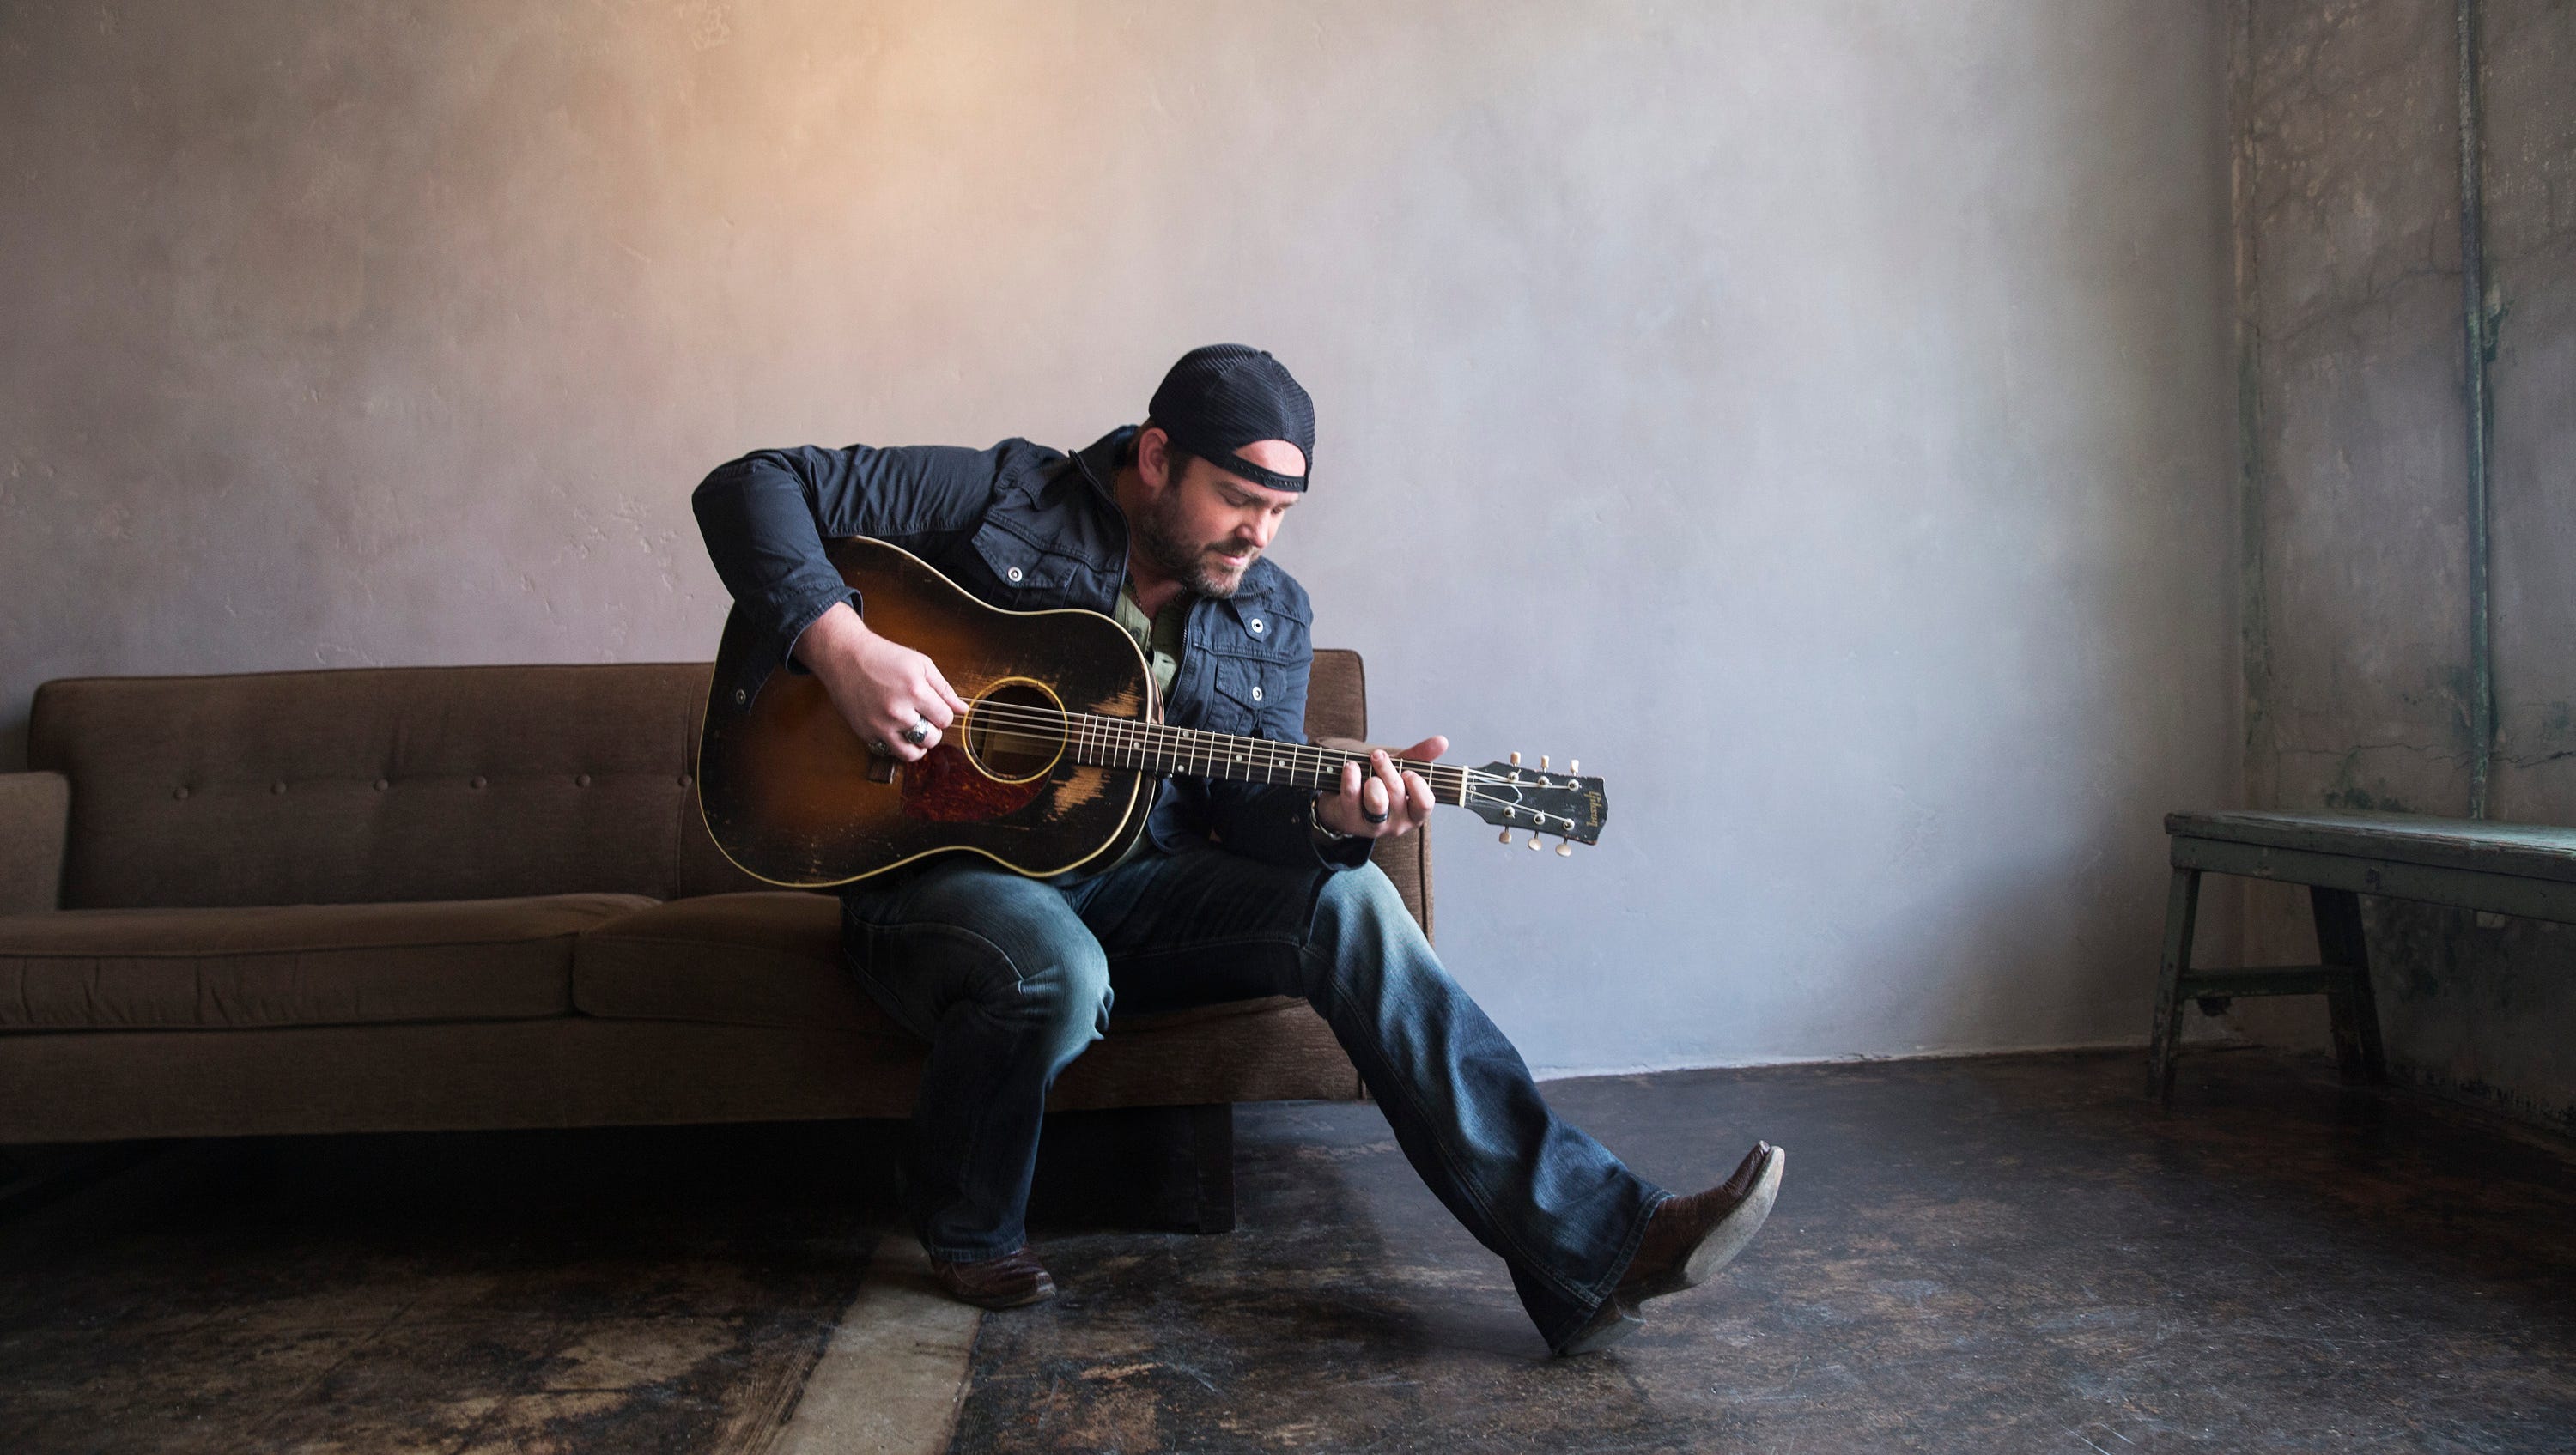 Lee Brice: The country music ambassador